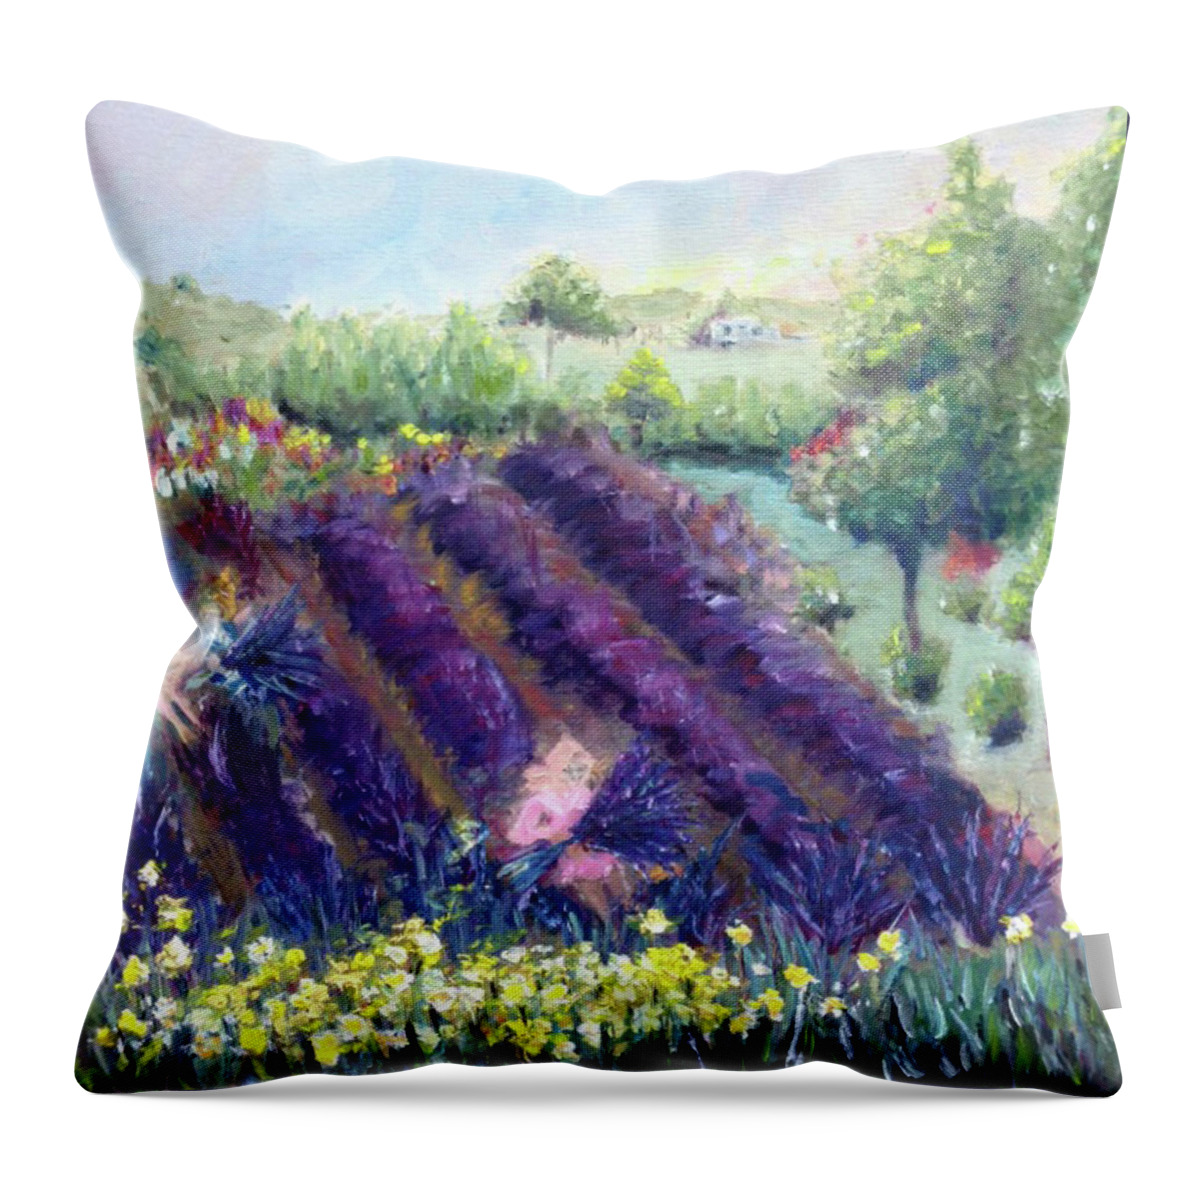 Provence Throw Pillow featuring the painting Provence Lavender Farm by Roxy Rich